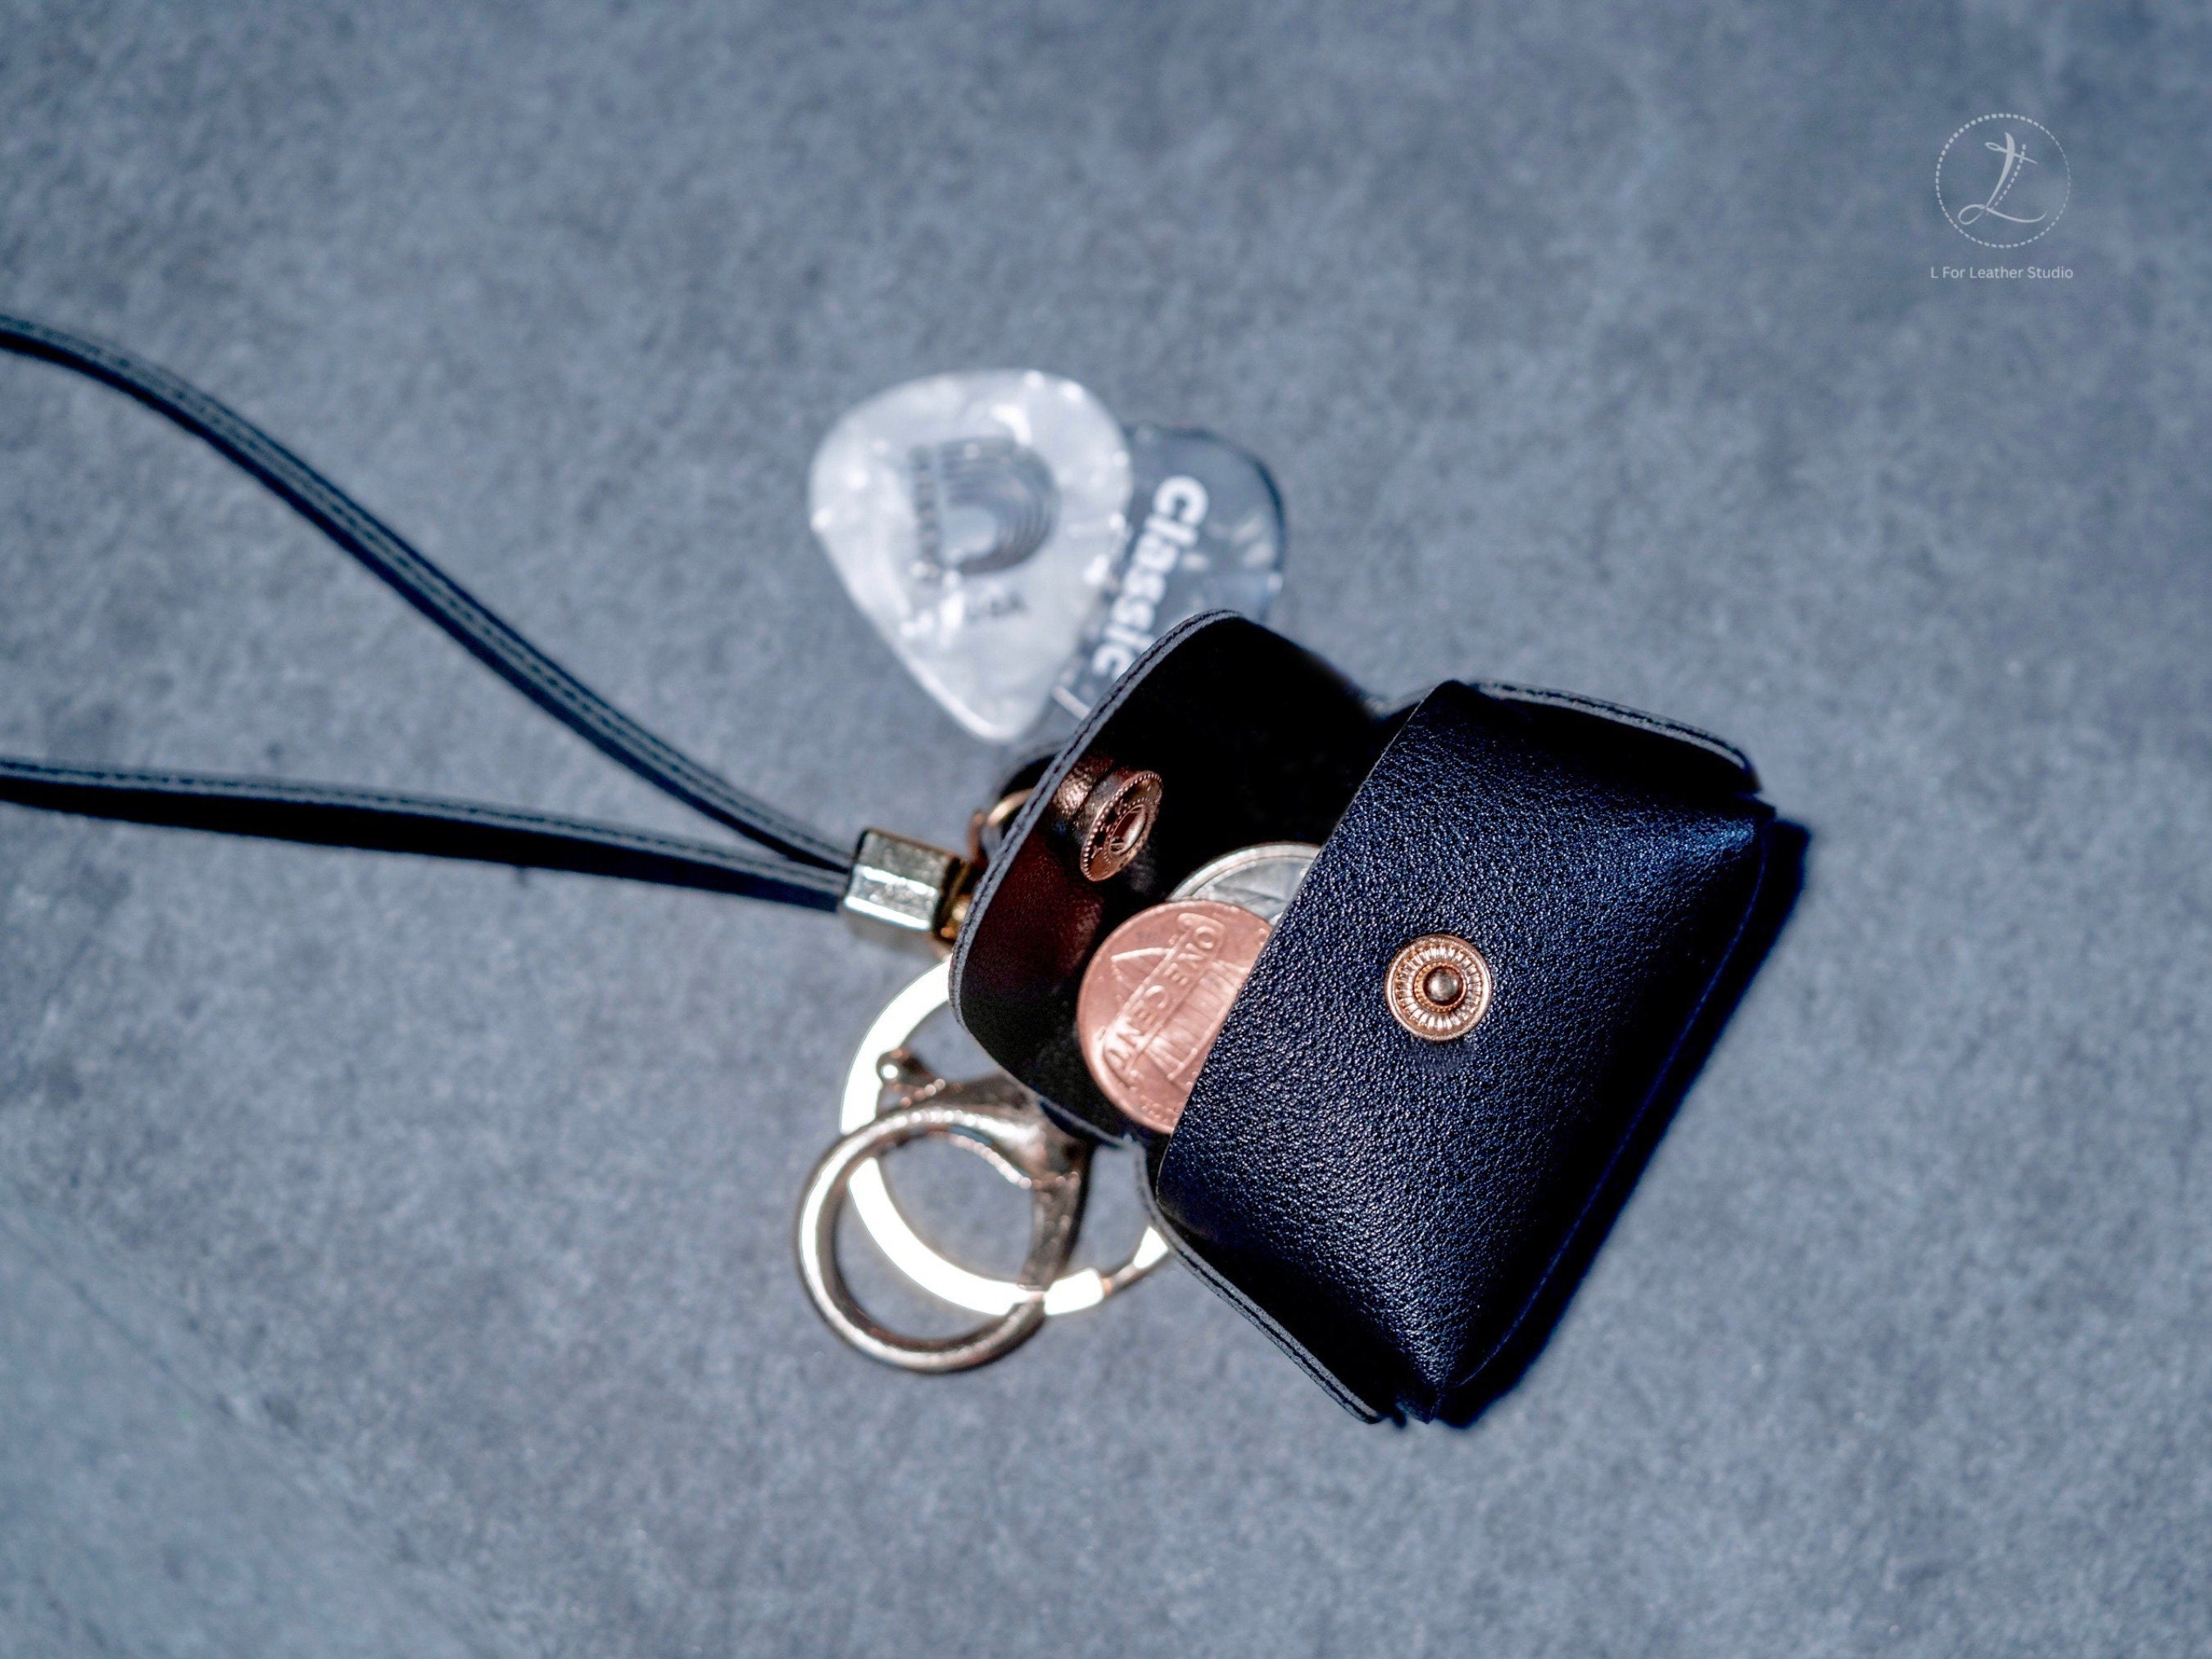 Mini Dumpling Vegan leather coin purse with strap, keyring and lobster